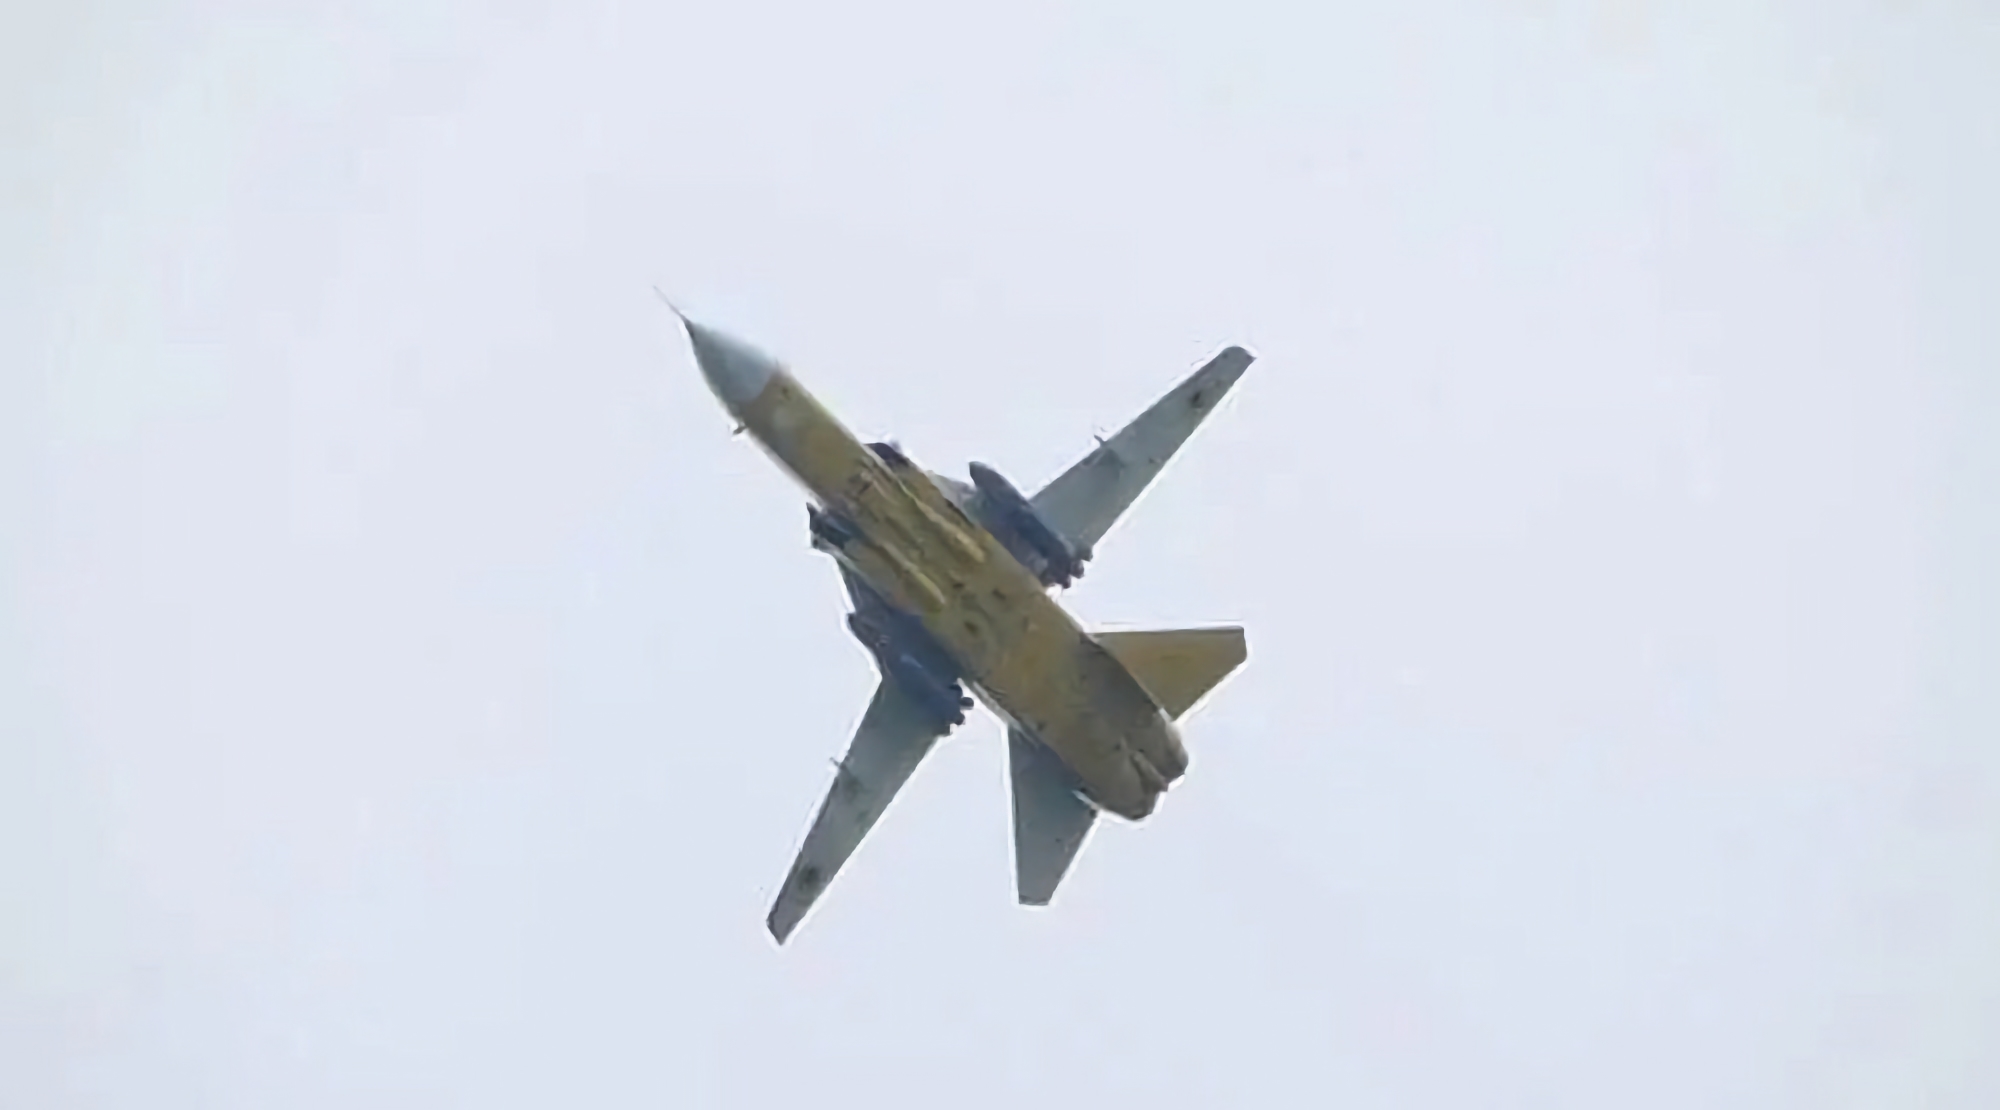 Ukrainian Su-24 bombers have pylons from British Tornado aircraft, allowing them to carry Storm Shadow missiles